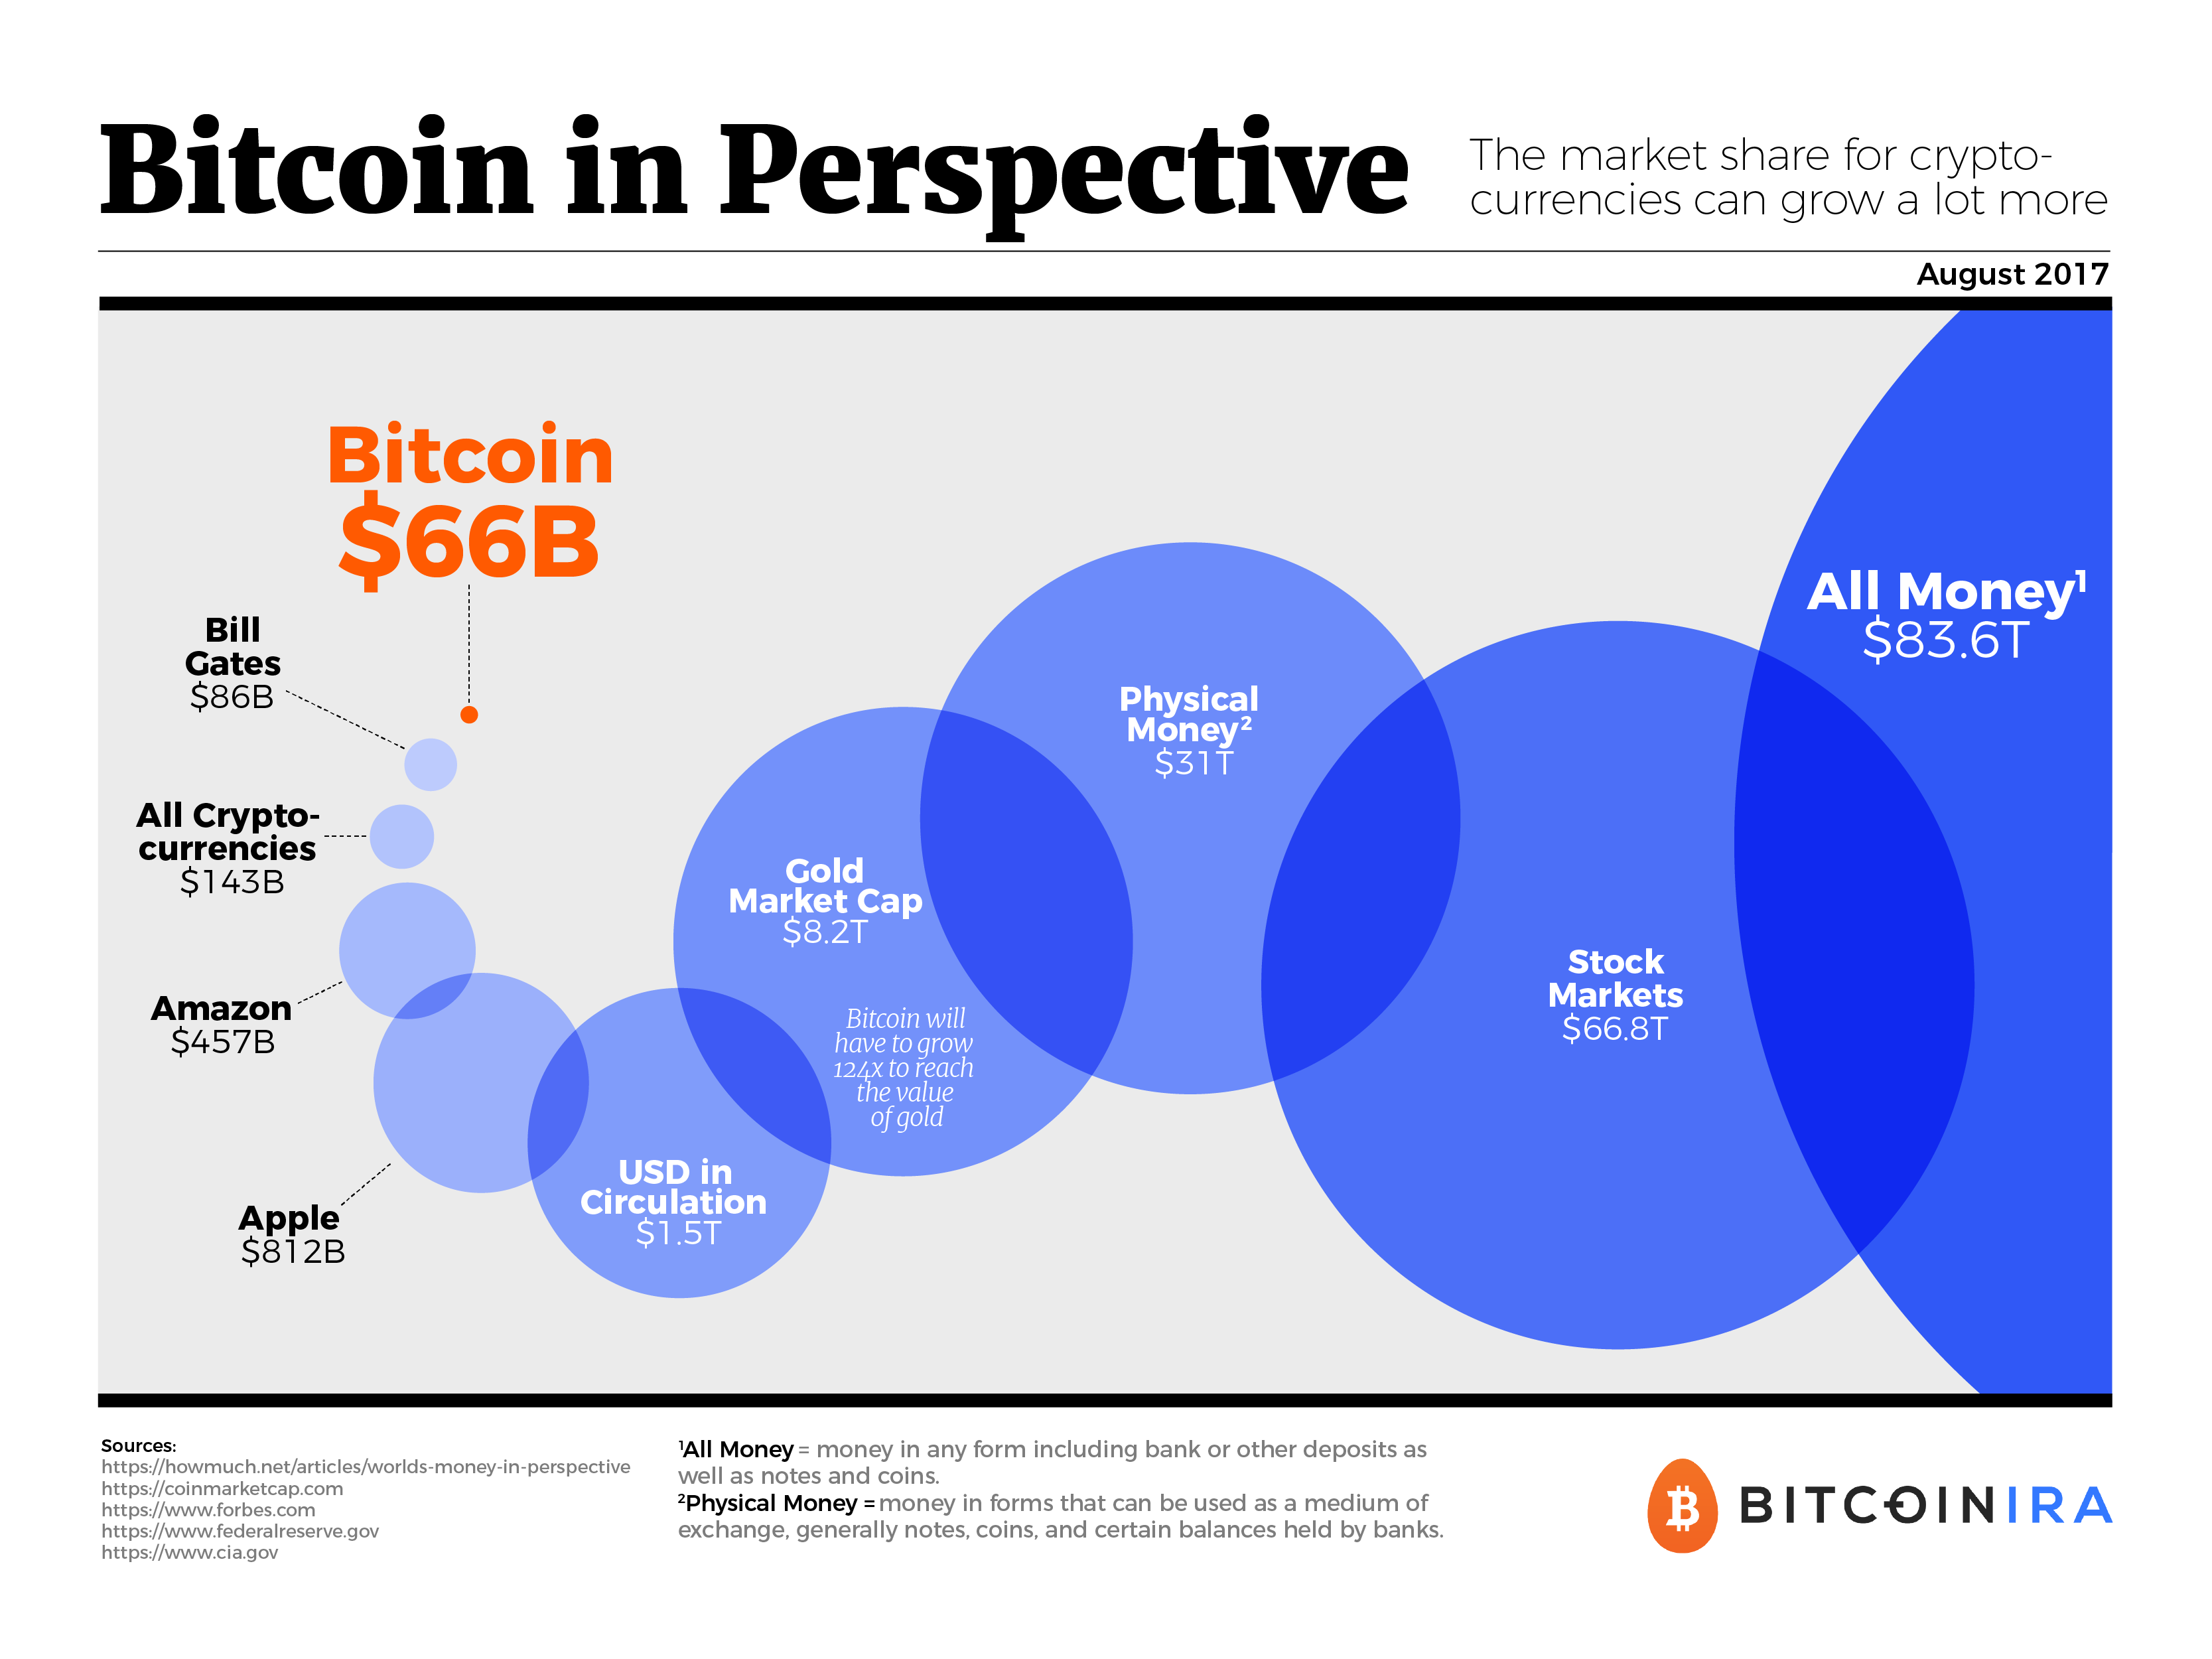 What do influential people think about bitcoin?